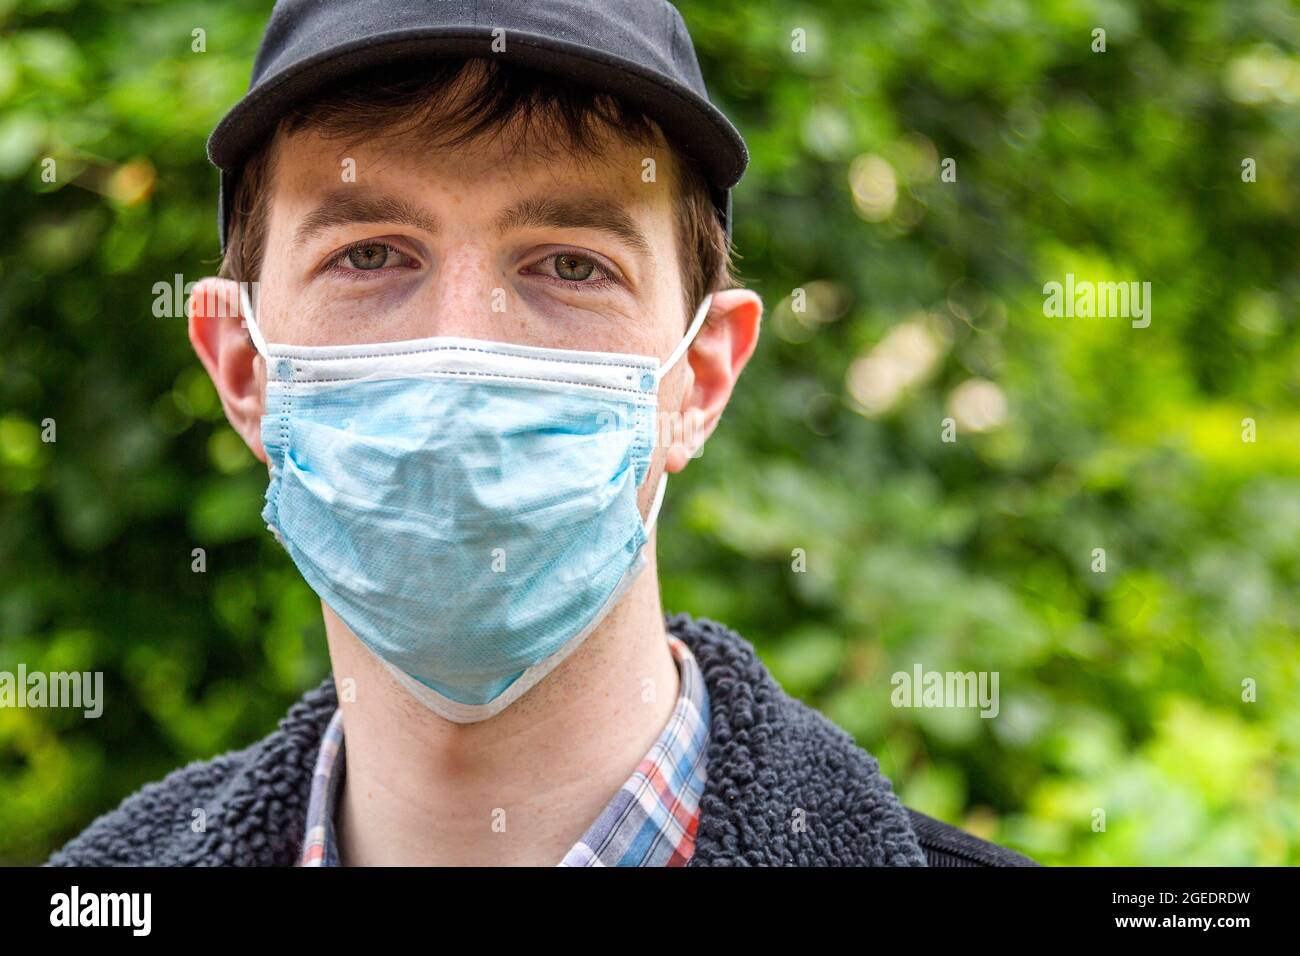 A young man wearing a face mask outdoors. Wearing a face covering as a measure to prevent the spread of the Covid 19 virus became the new normal. Stock Photo